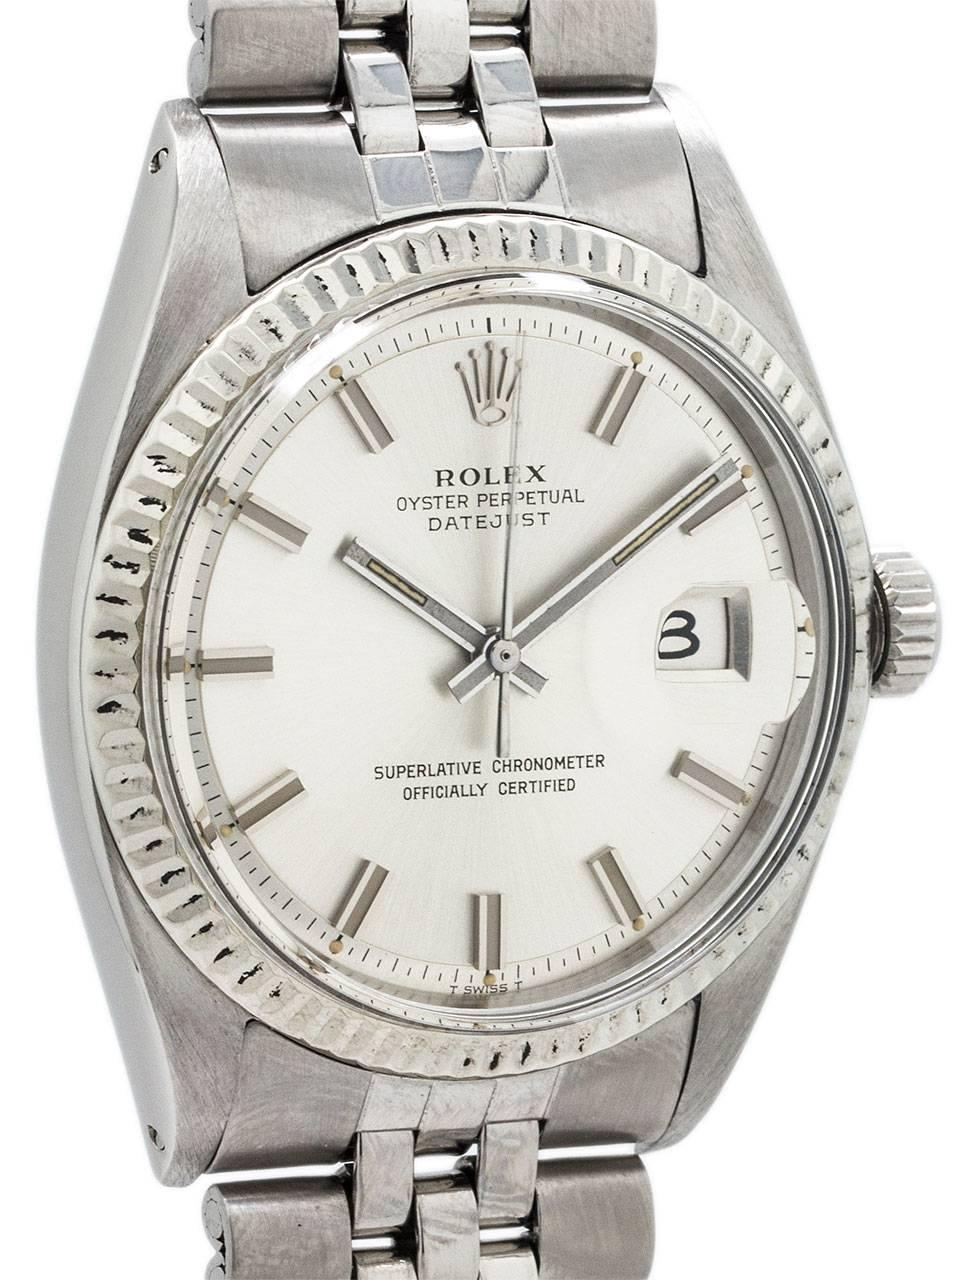 Rolex Oyster Perpetual Datejust ref 1601 serial no 3.1 million circa 1972. 36mm diameter case with 14K white gold fluted bezel and acrylic crystal. Original silver satin pie pan “Fat Boy” dial with wide applied silver indexes and wide silver baton